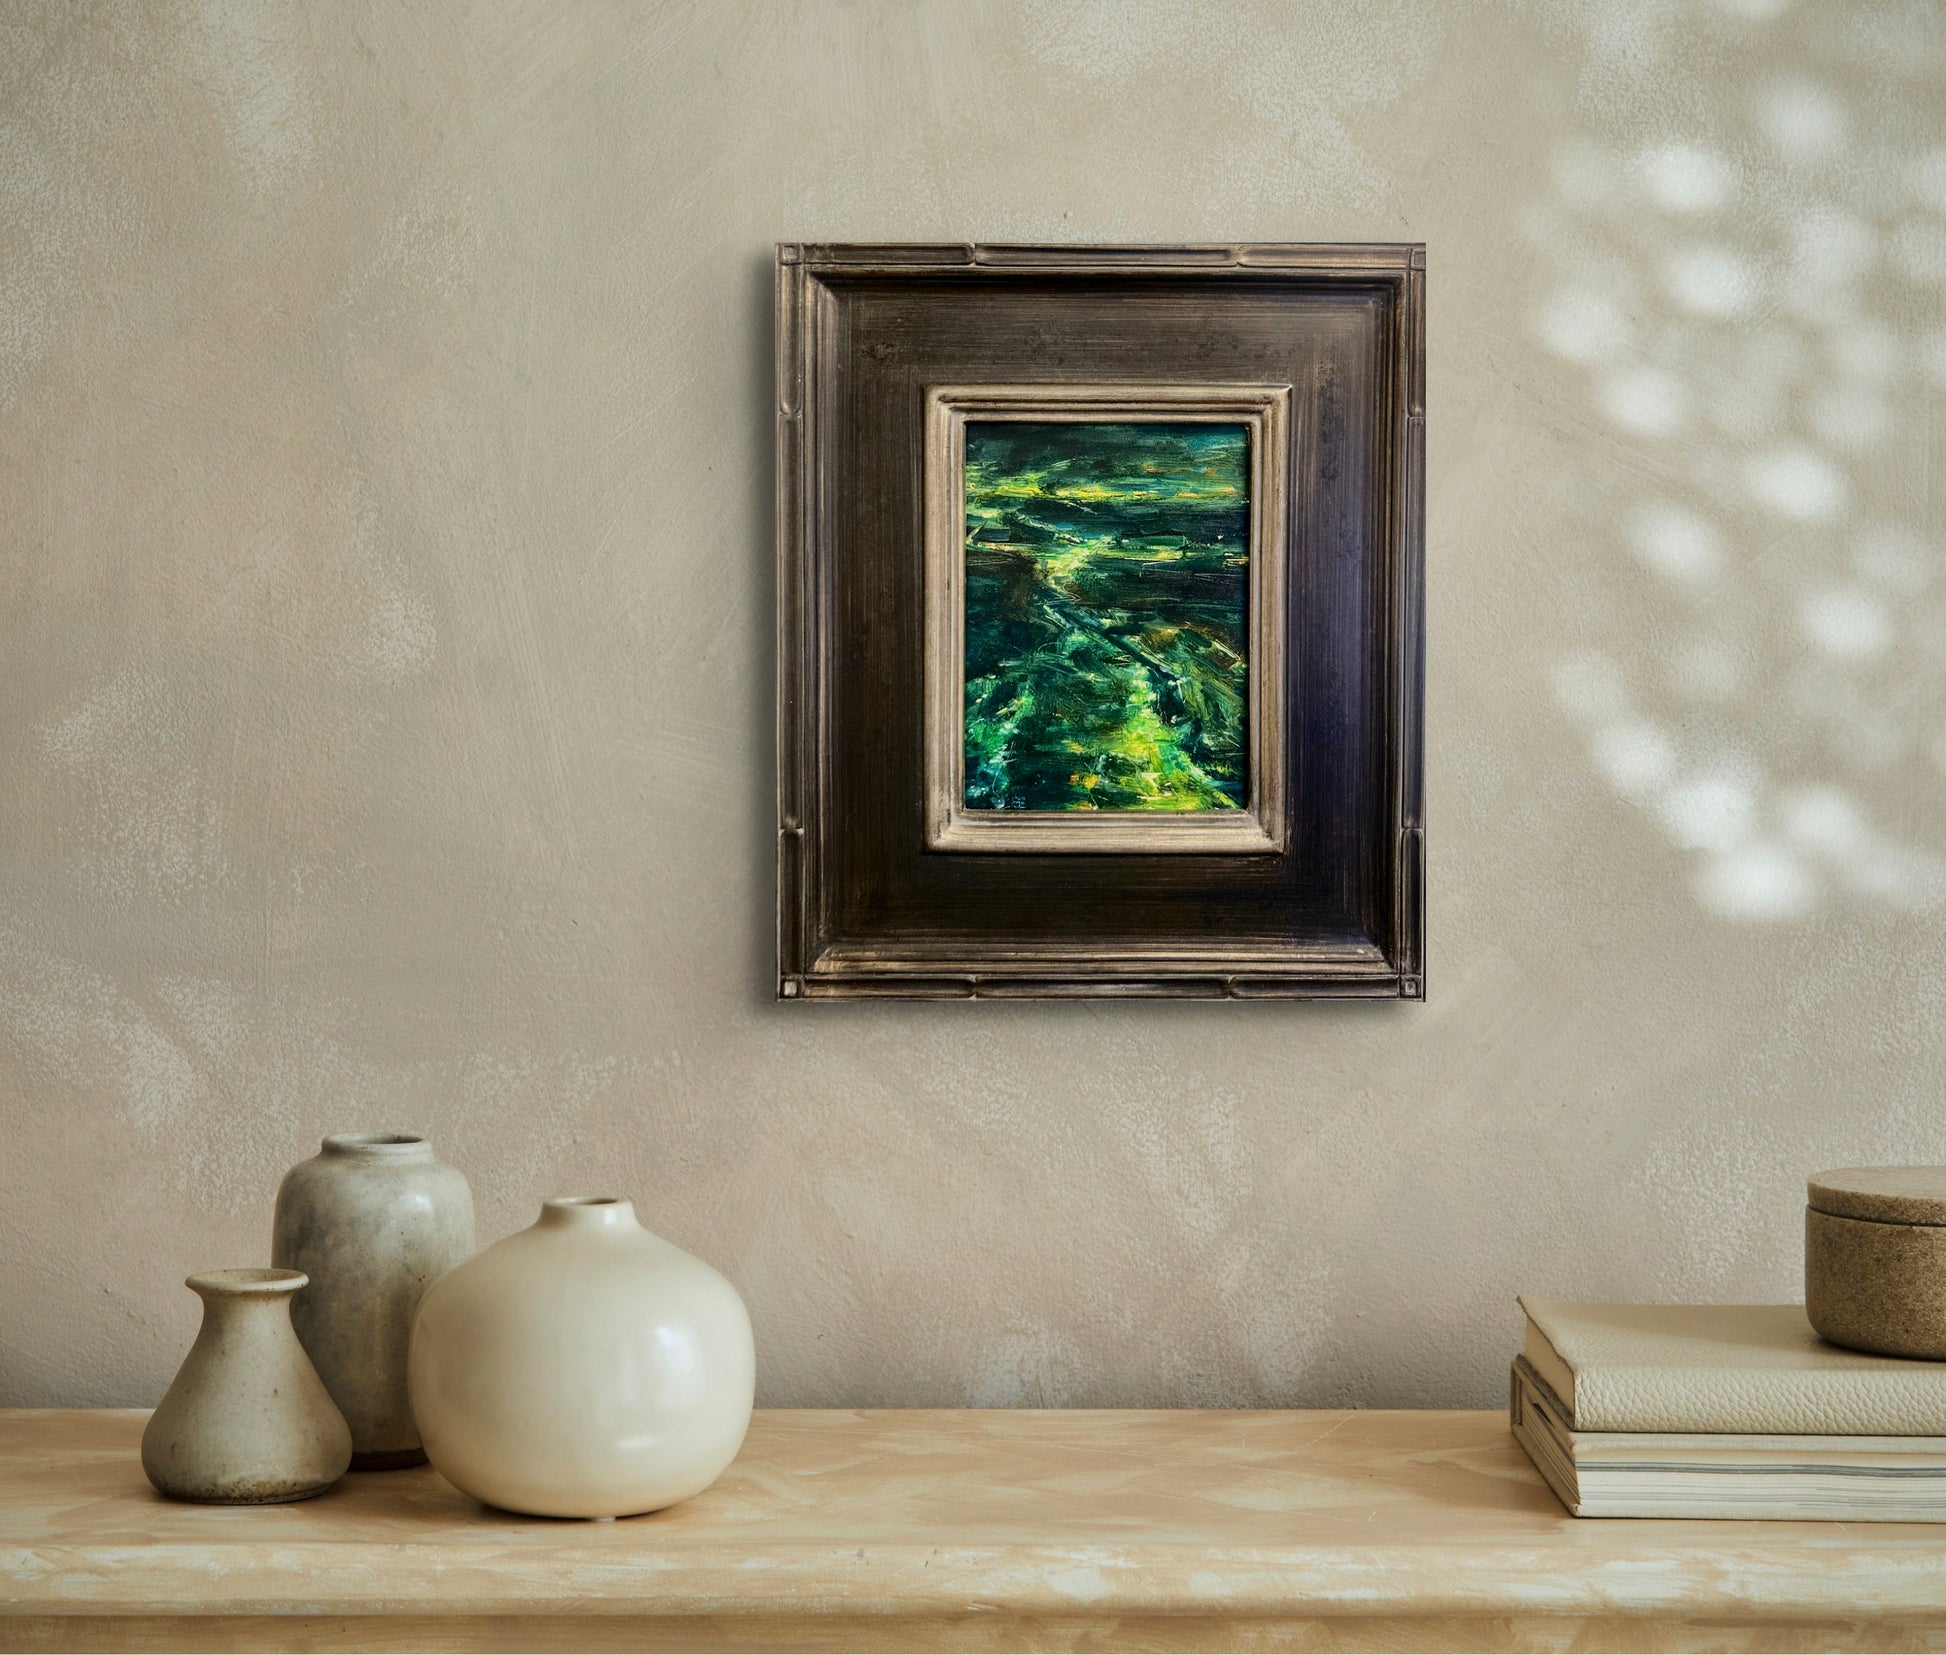 Abstract oil painting in green shades titled 'East End' by E. E. Jacks in situ